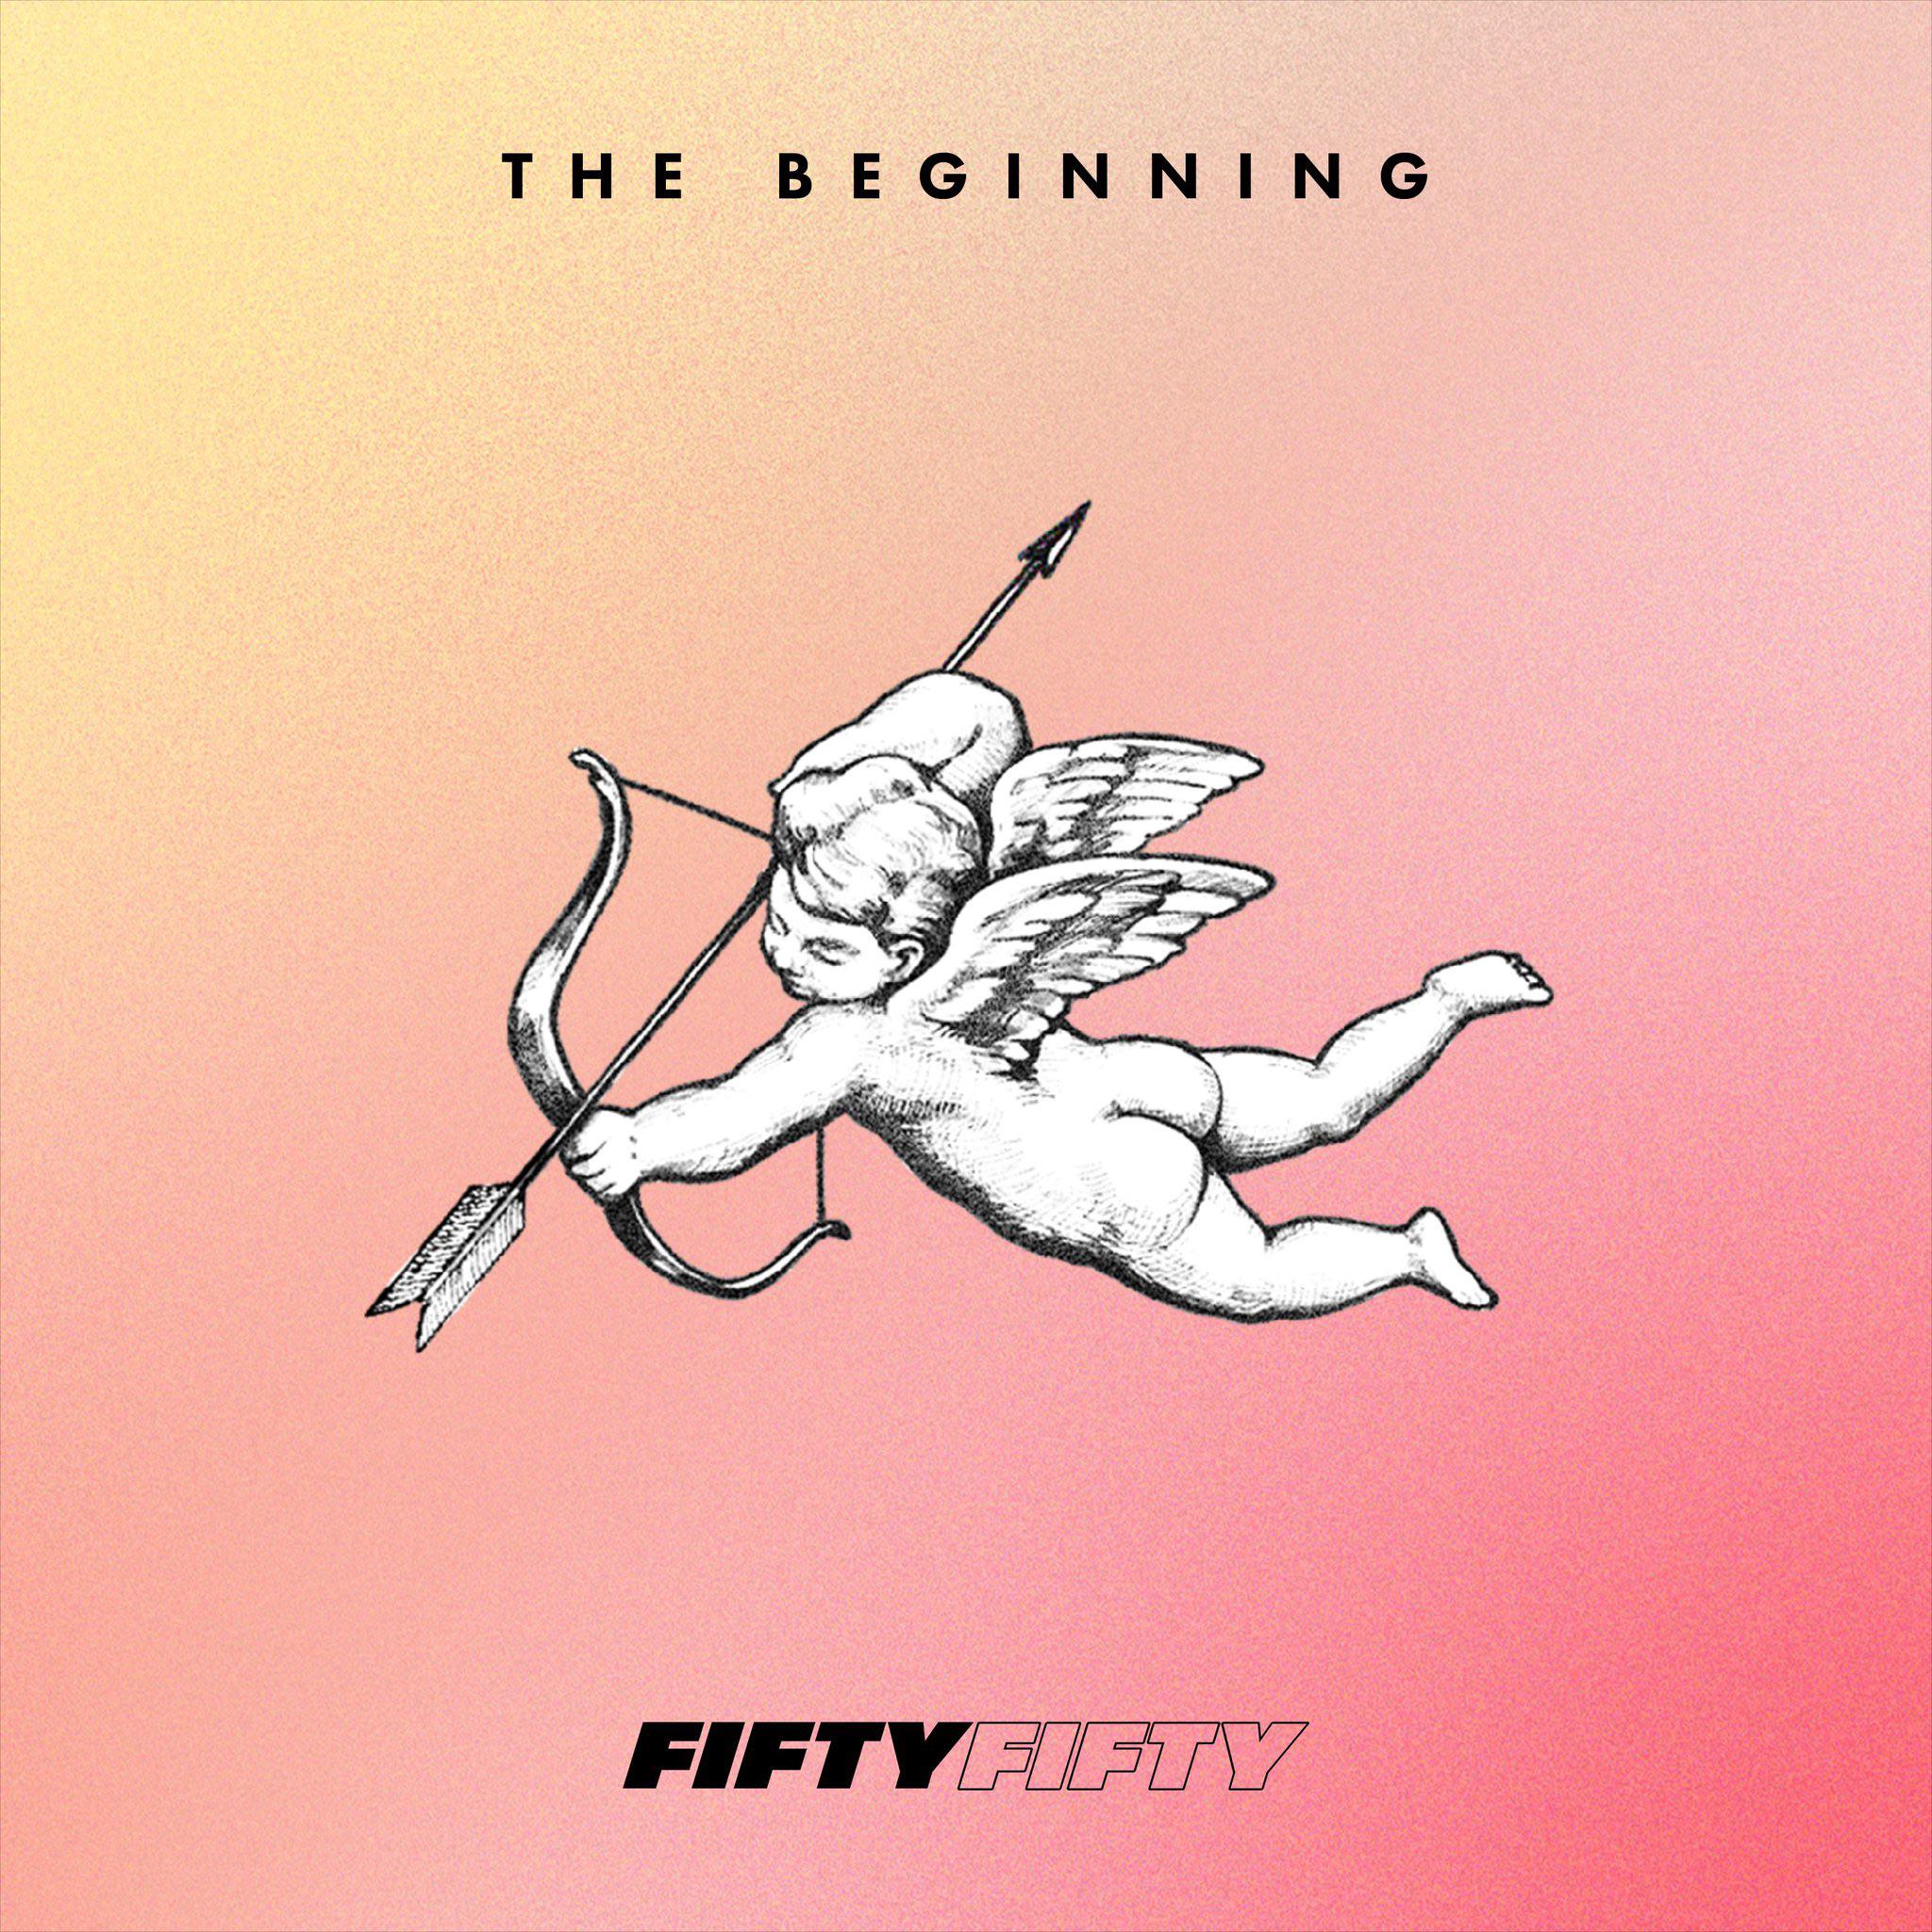 The Beginning is the first single from the new project by London-based duo FIFTY FIFTY. - Cupid